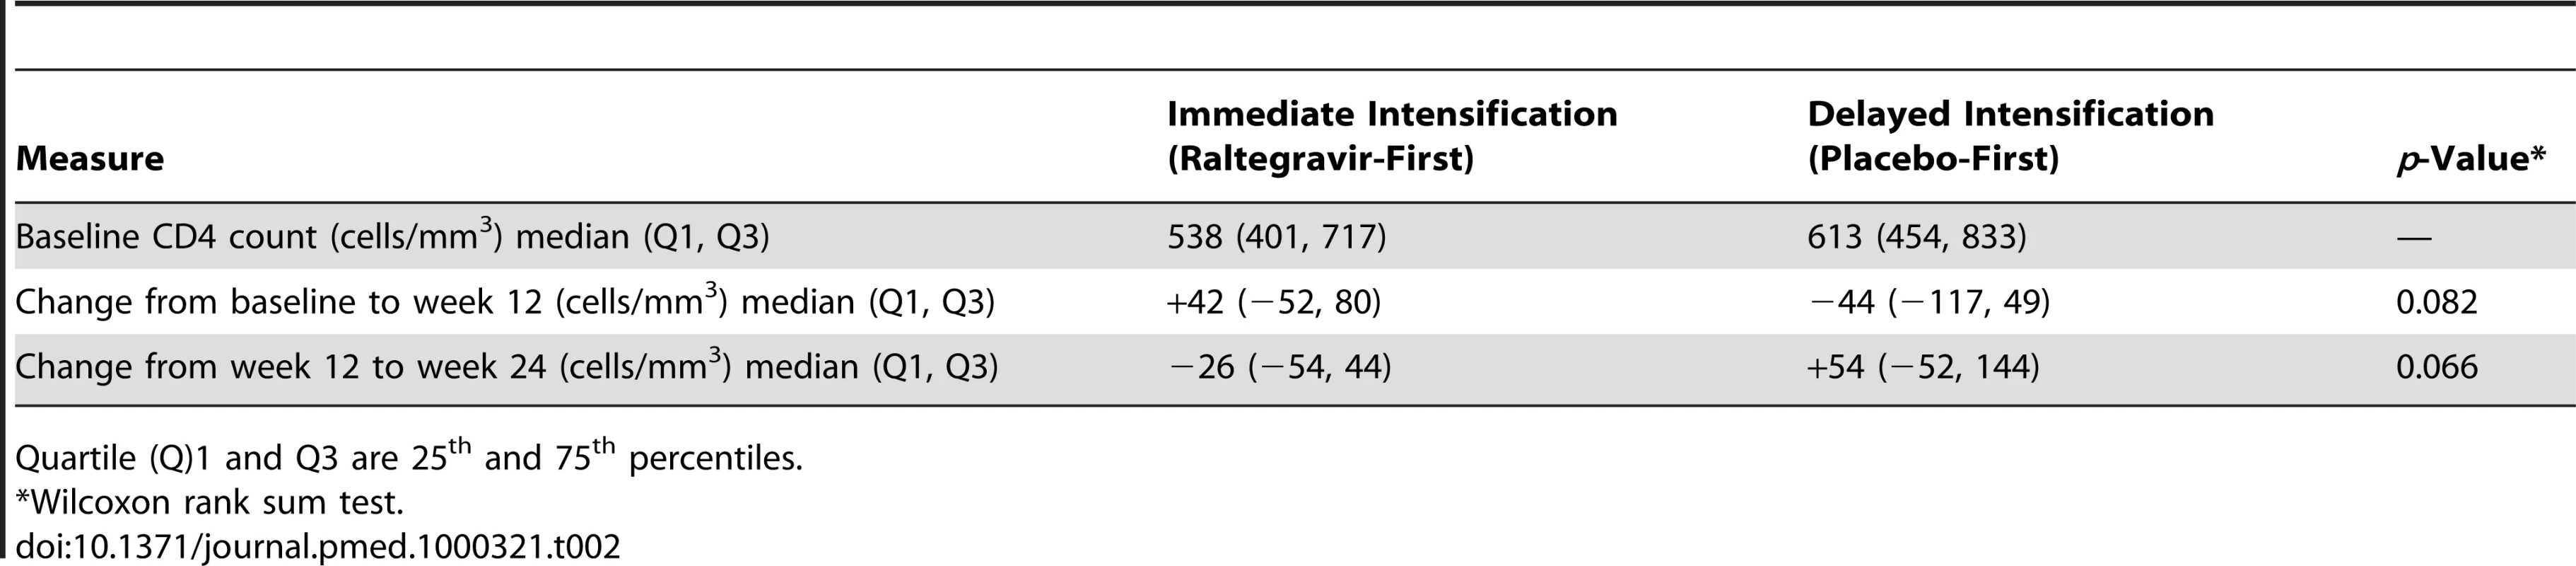 CD4 cell count changes in participants receiving immediate or delayed intensification with raltegravir.